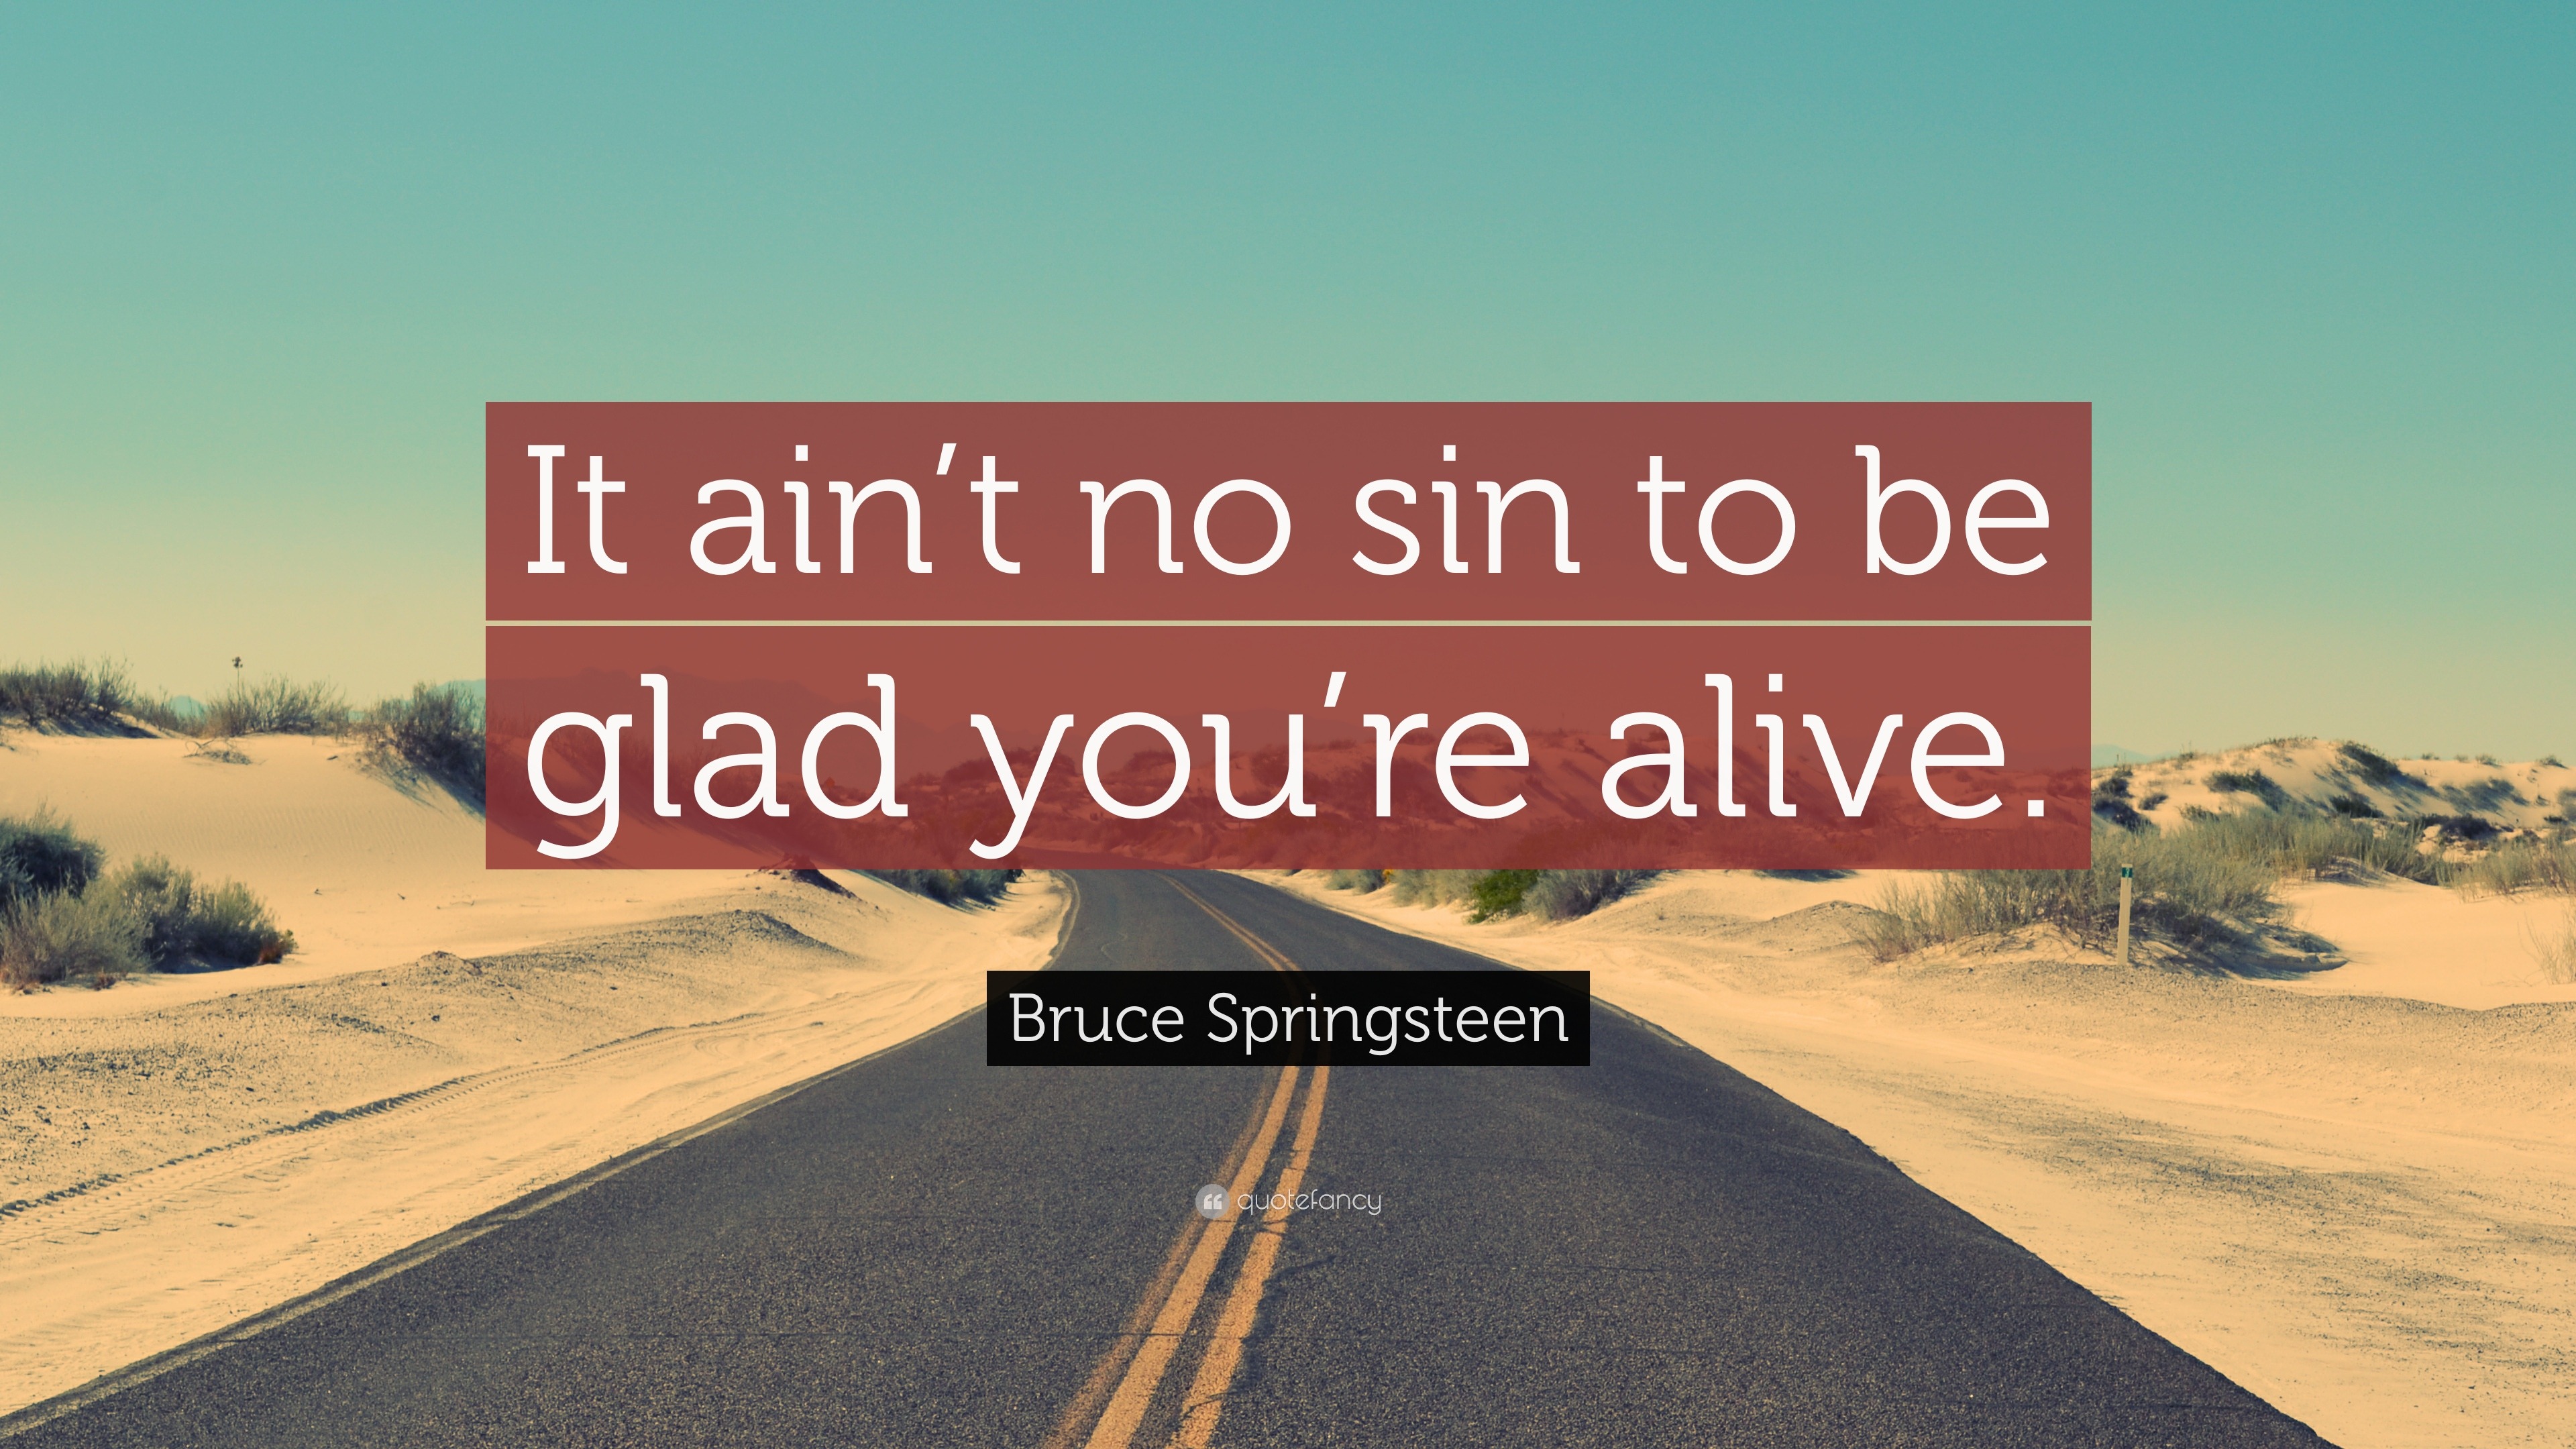 Bruce Springsteen Quote: “It ain't no sin to be glad you're alive.”